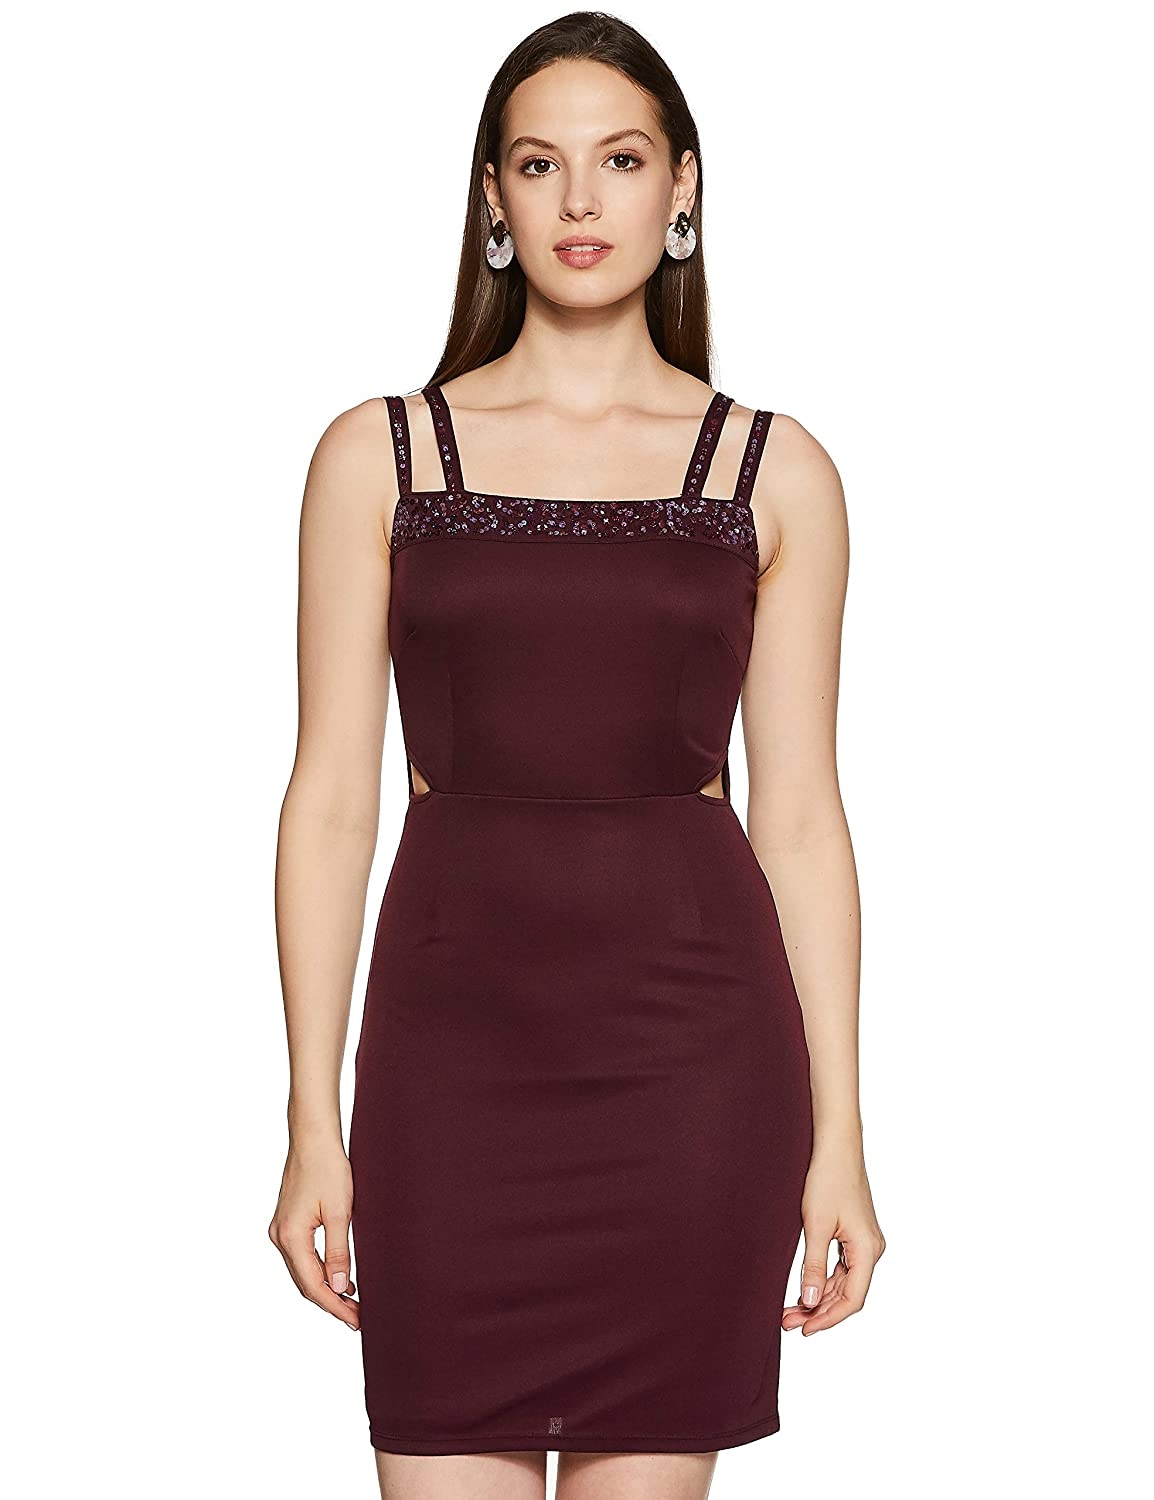 LY2 Embellished detail bodycon Dress